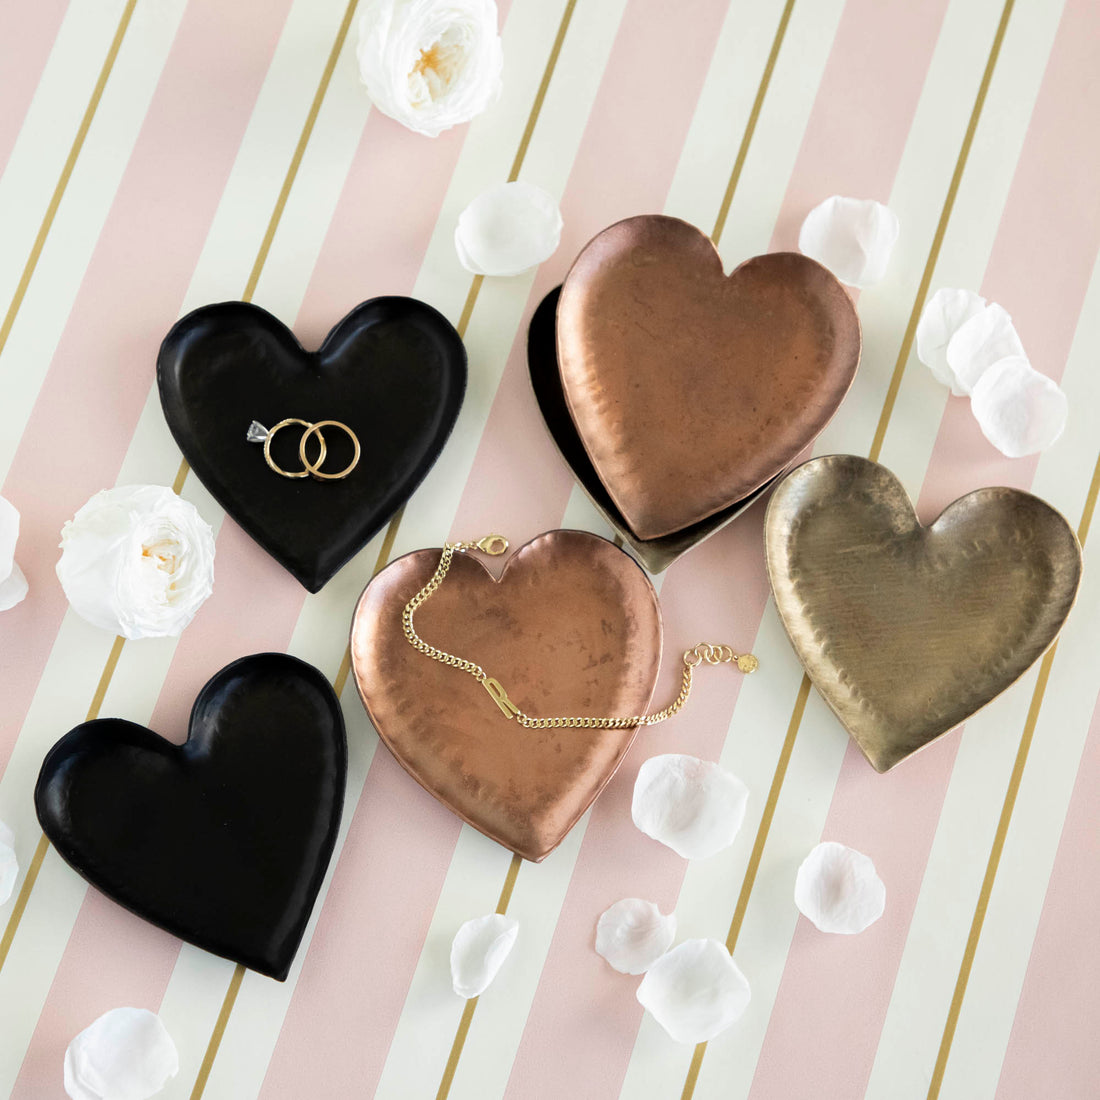 A HomArt Forged Iron Heart Tray with gold and silver rings on a copper-colored, pink, and white striped surface.